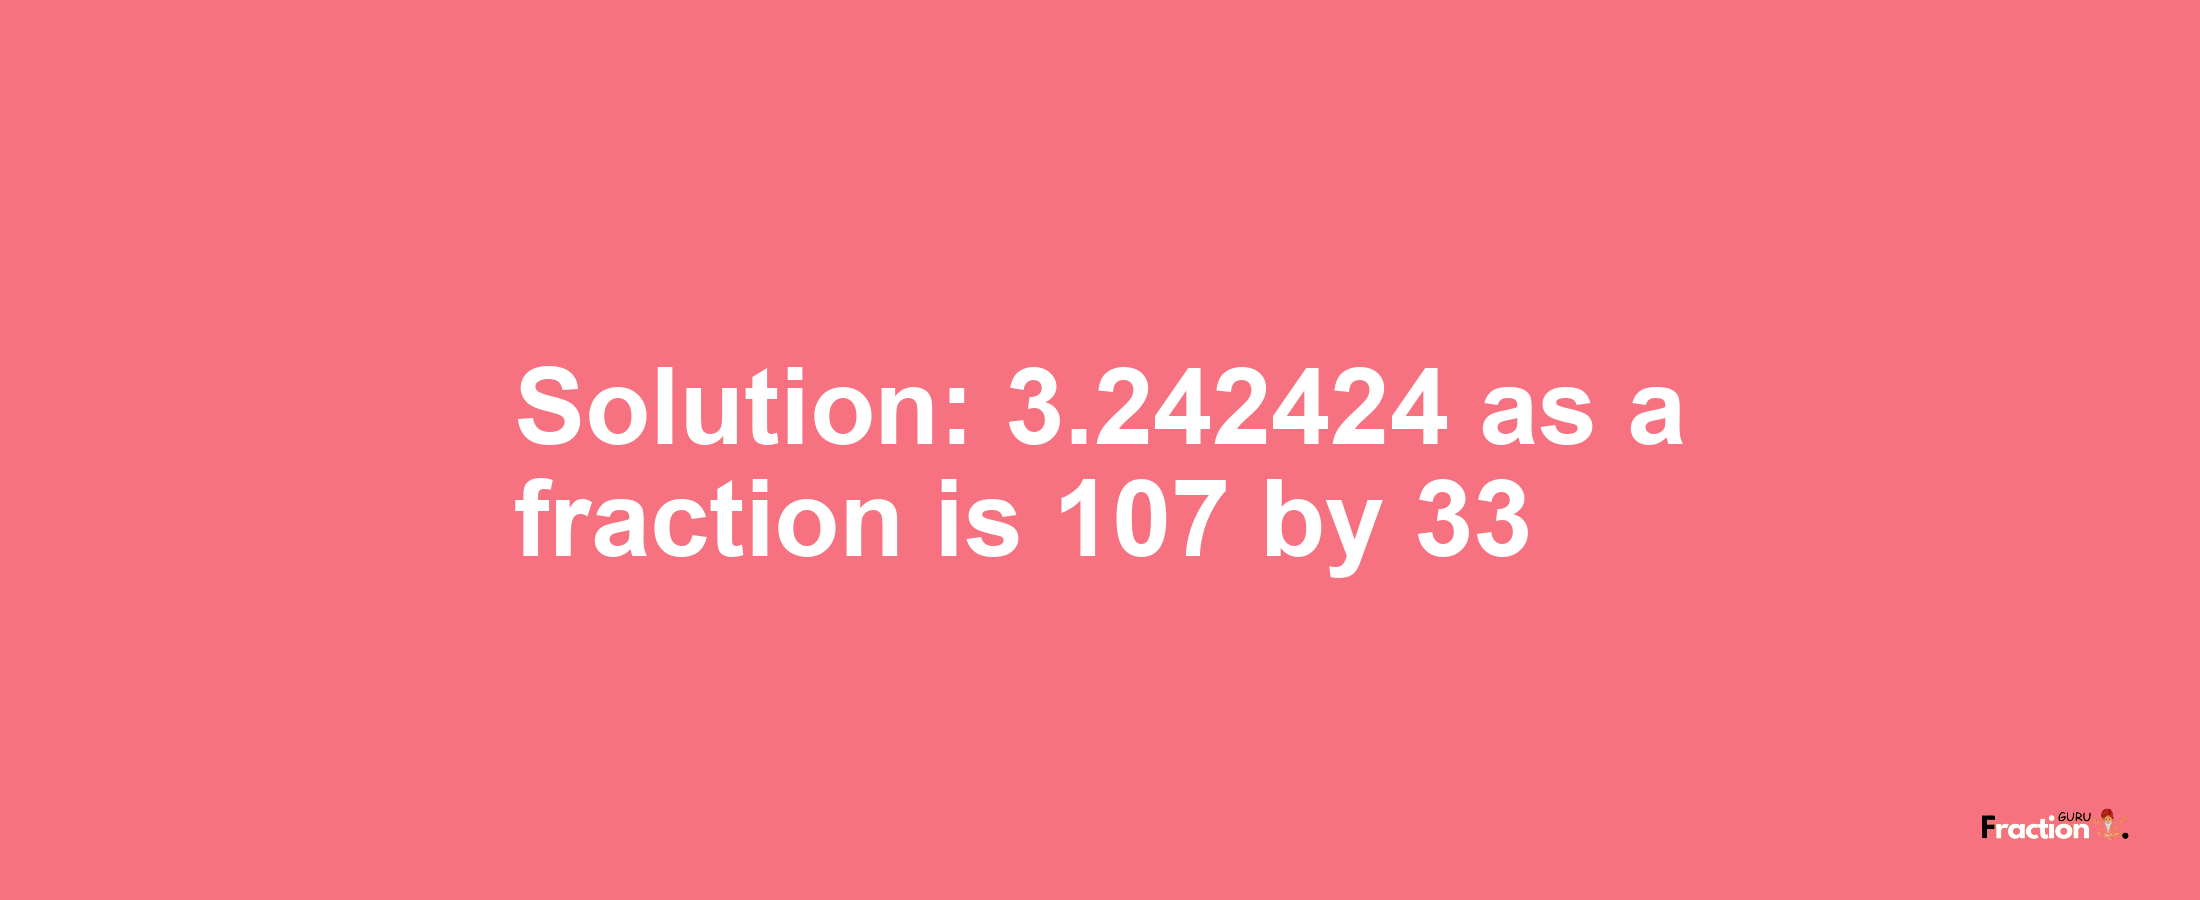 Solution:3.242424 as a fraction is 107/33